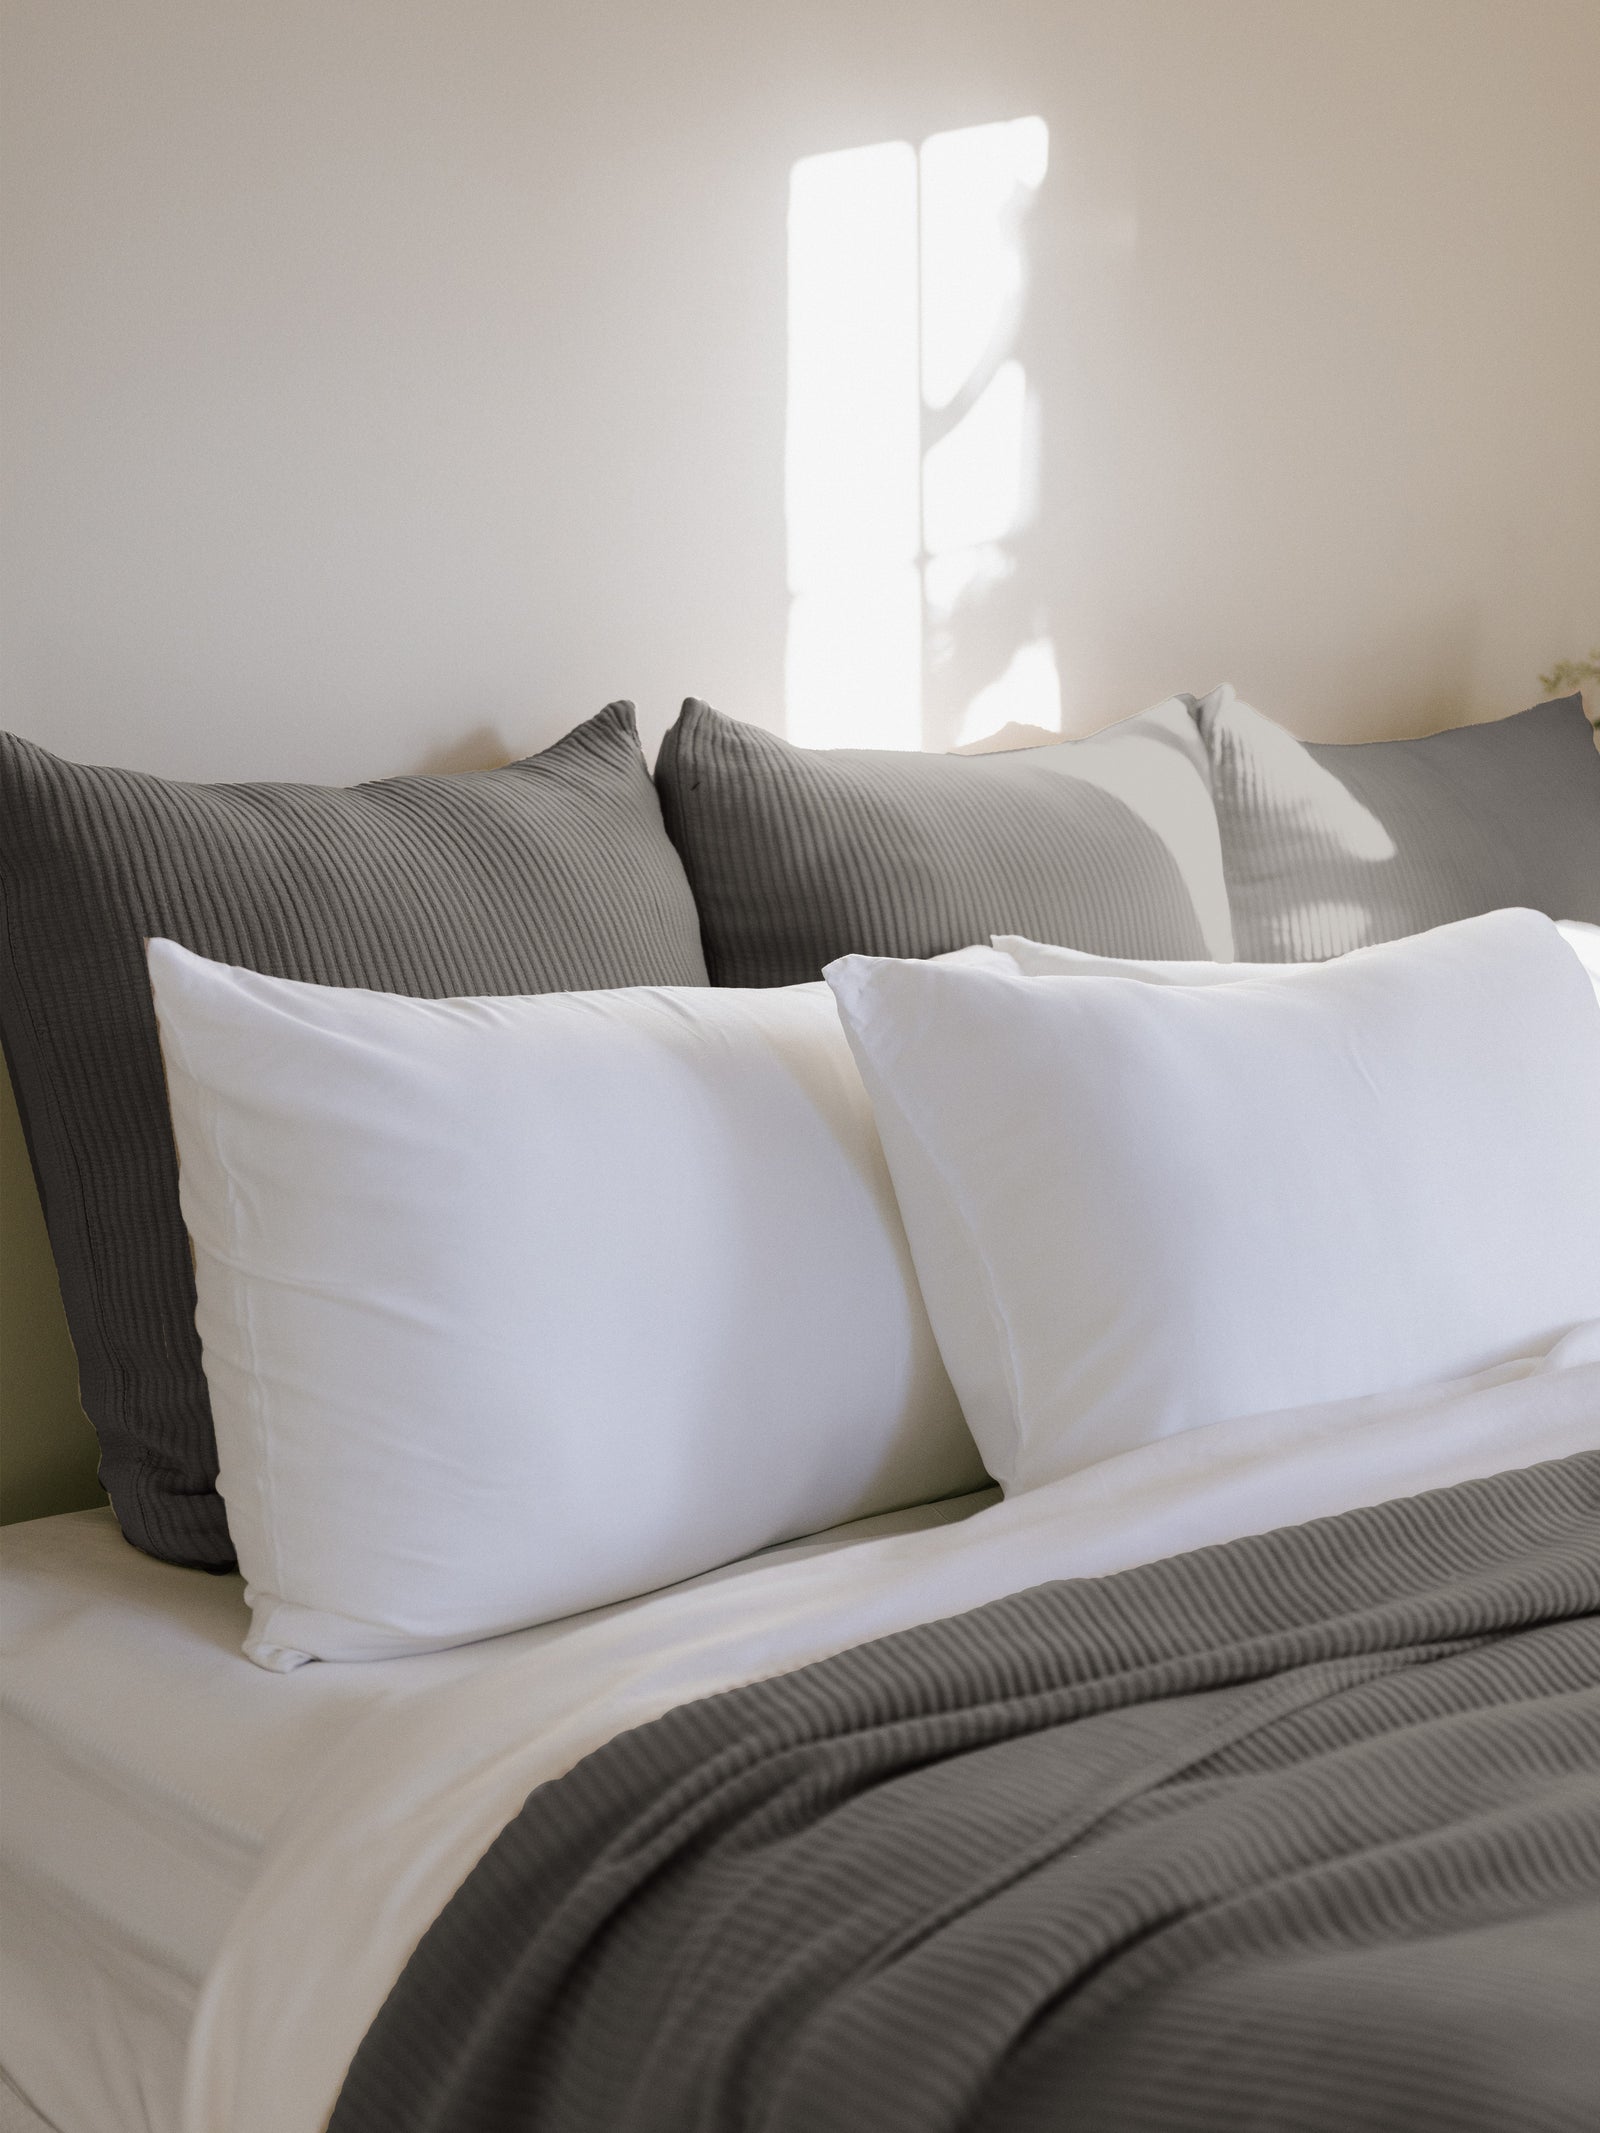 Charcoal euro coverlet shams behind white pillows on a bed 